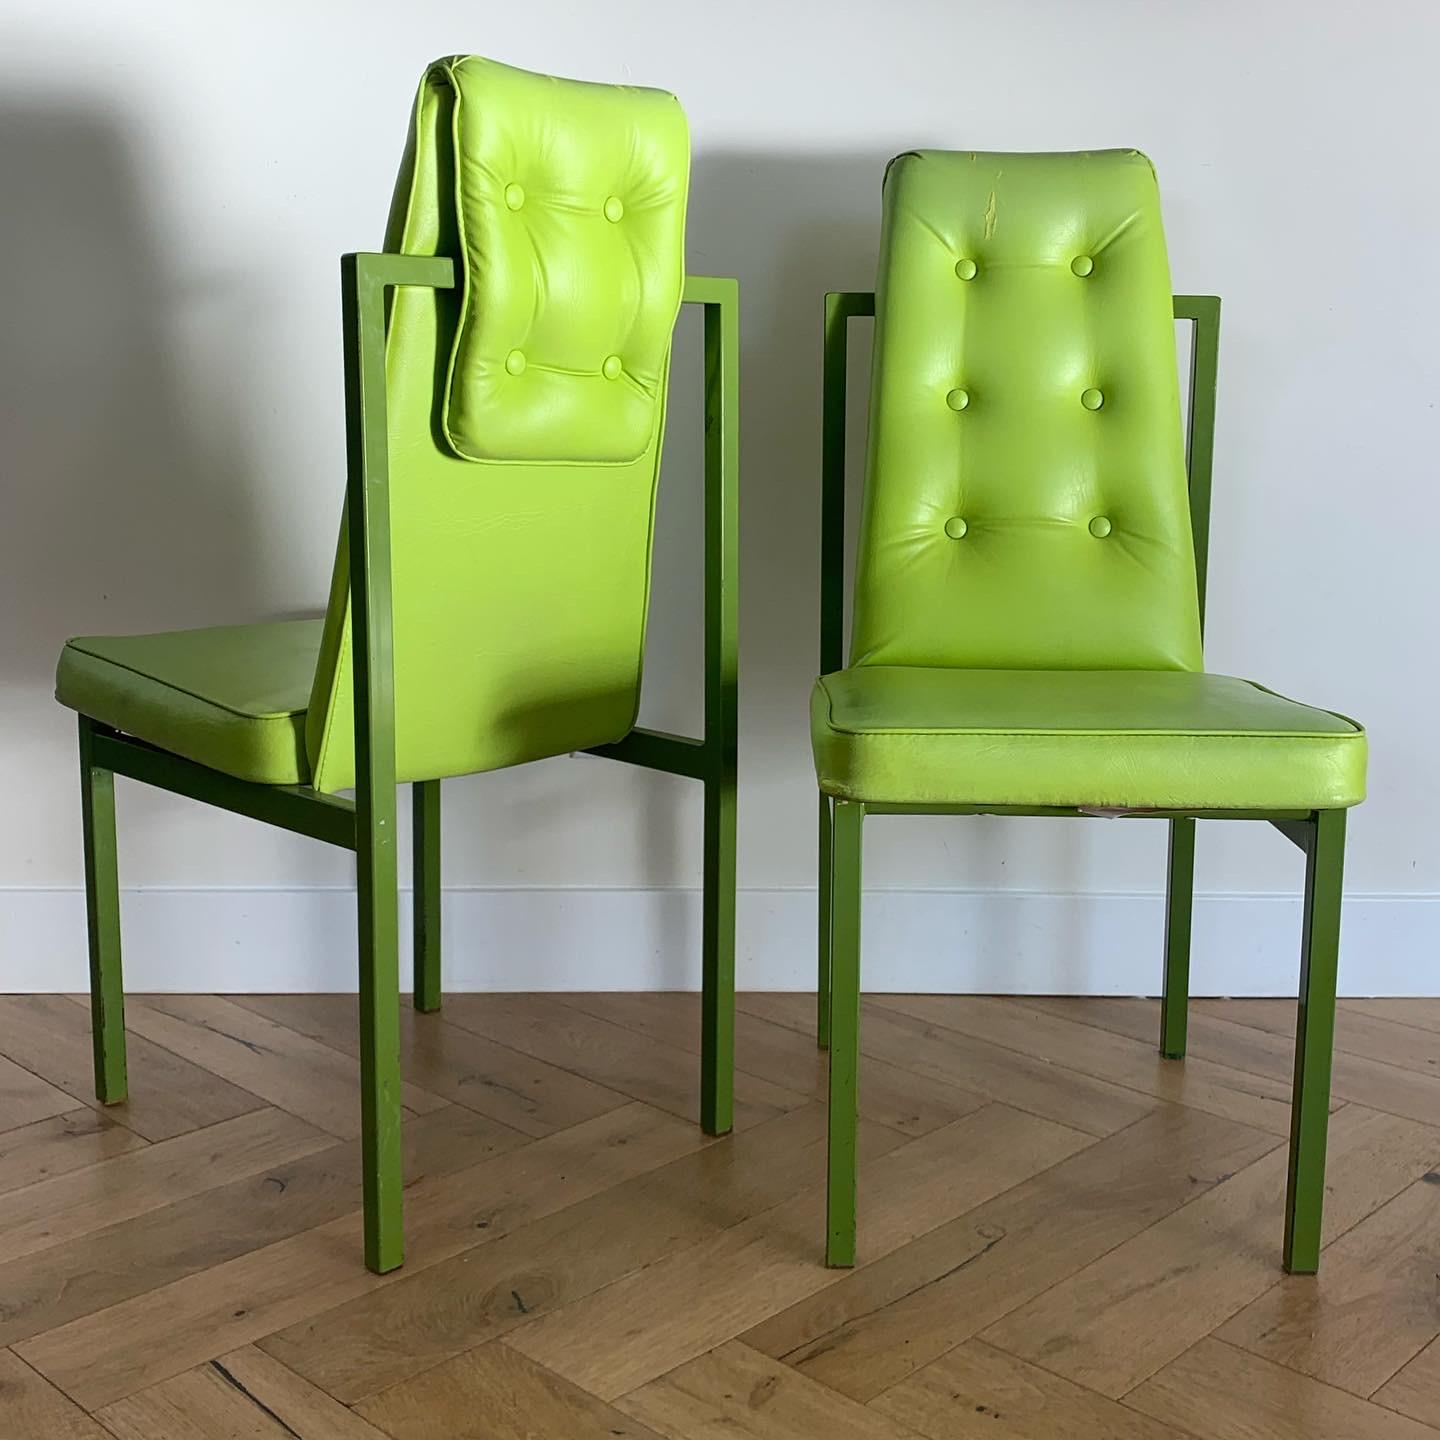 Late 20th Century Pair of Geometric Chartreuse Cal-Style Accent Chairs, circa 1970s